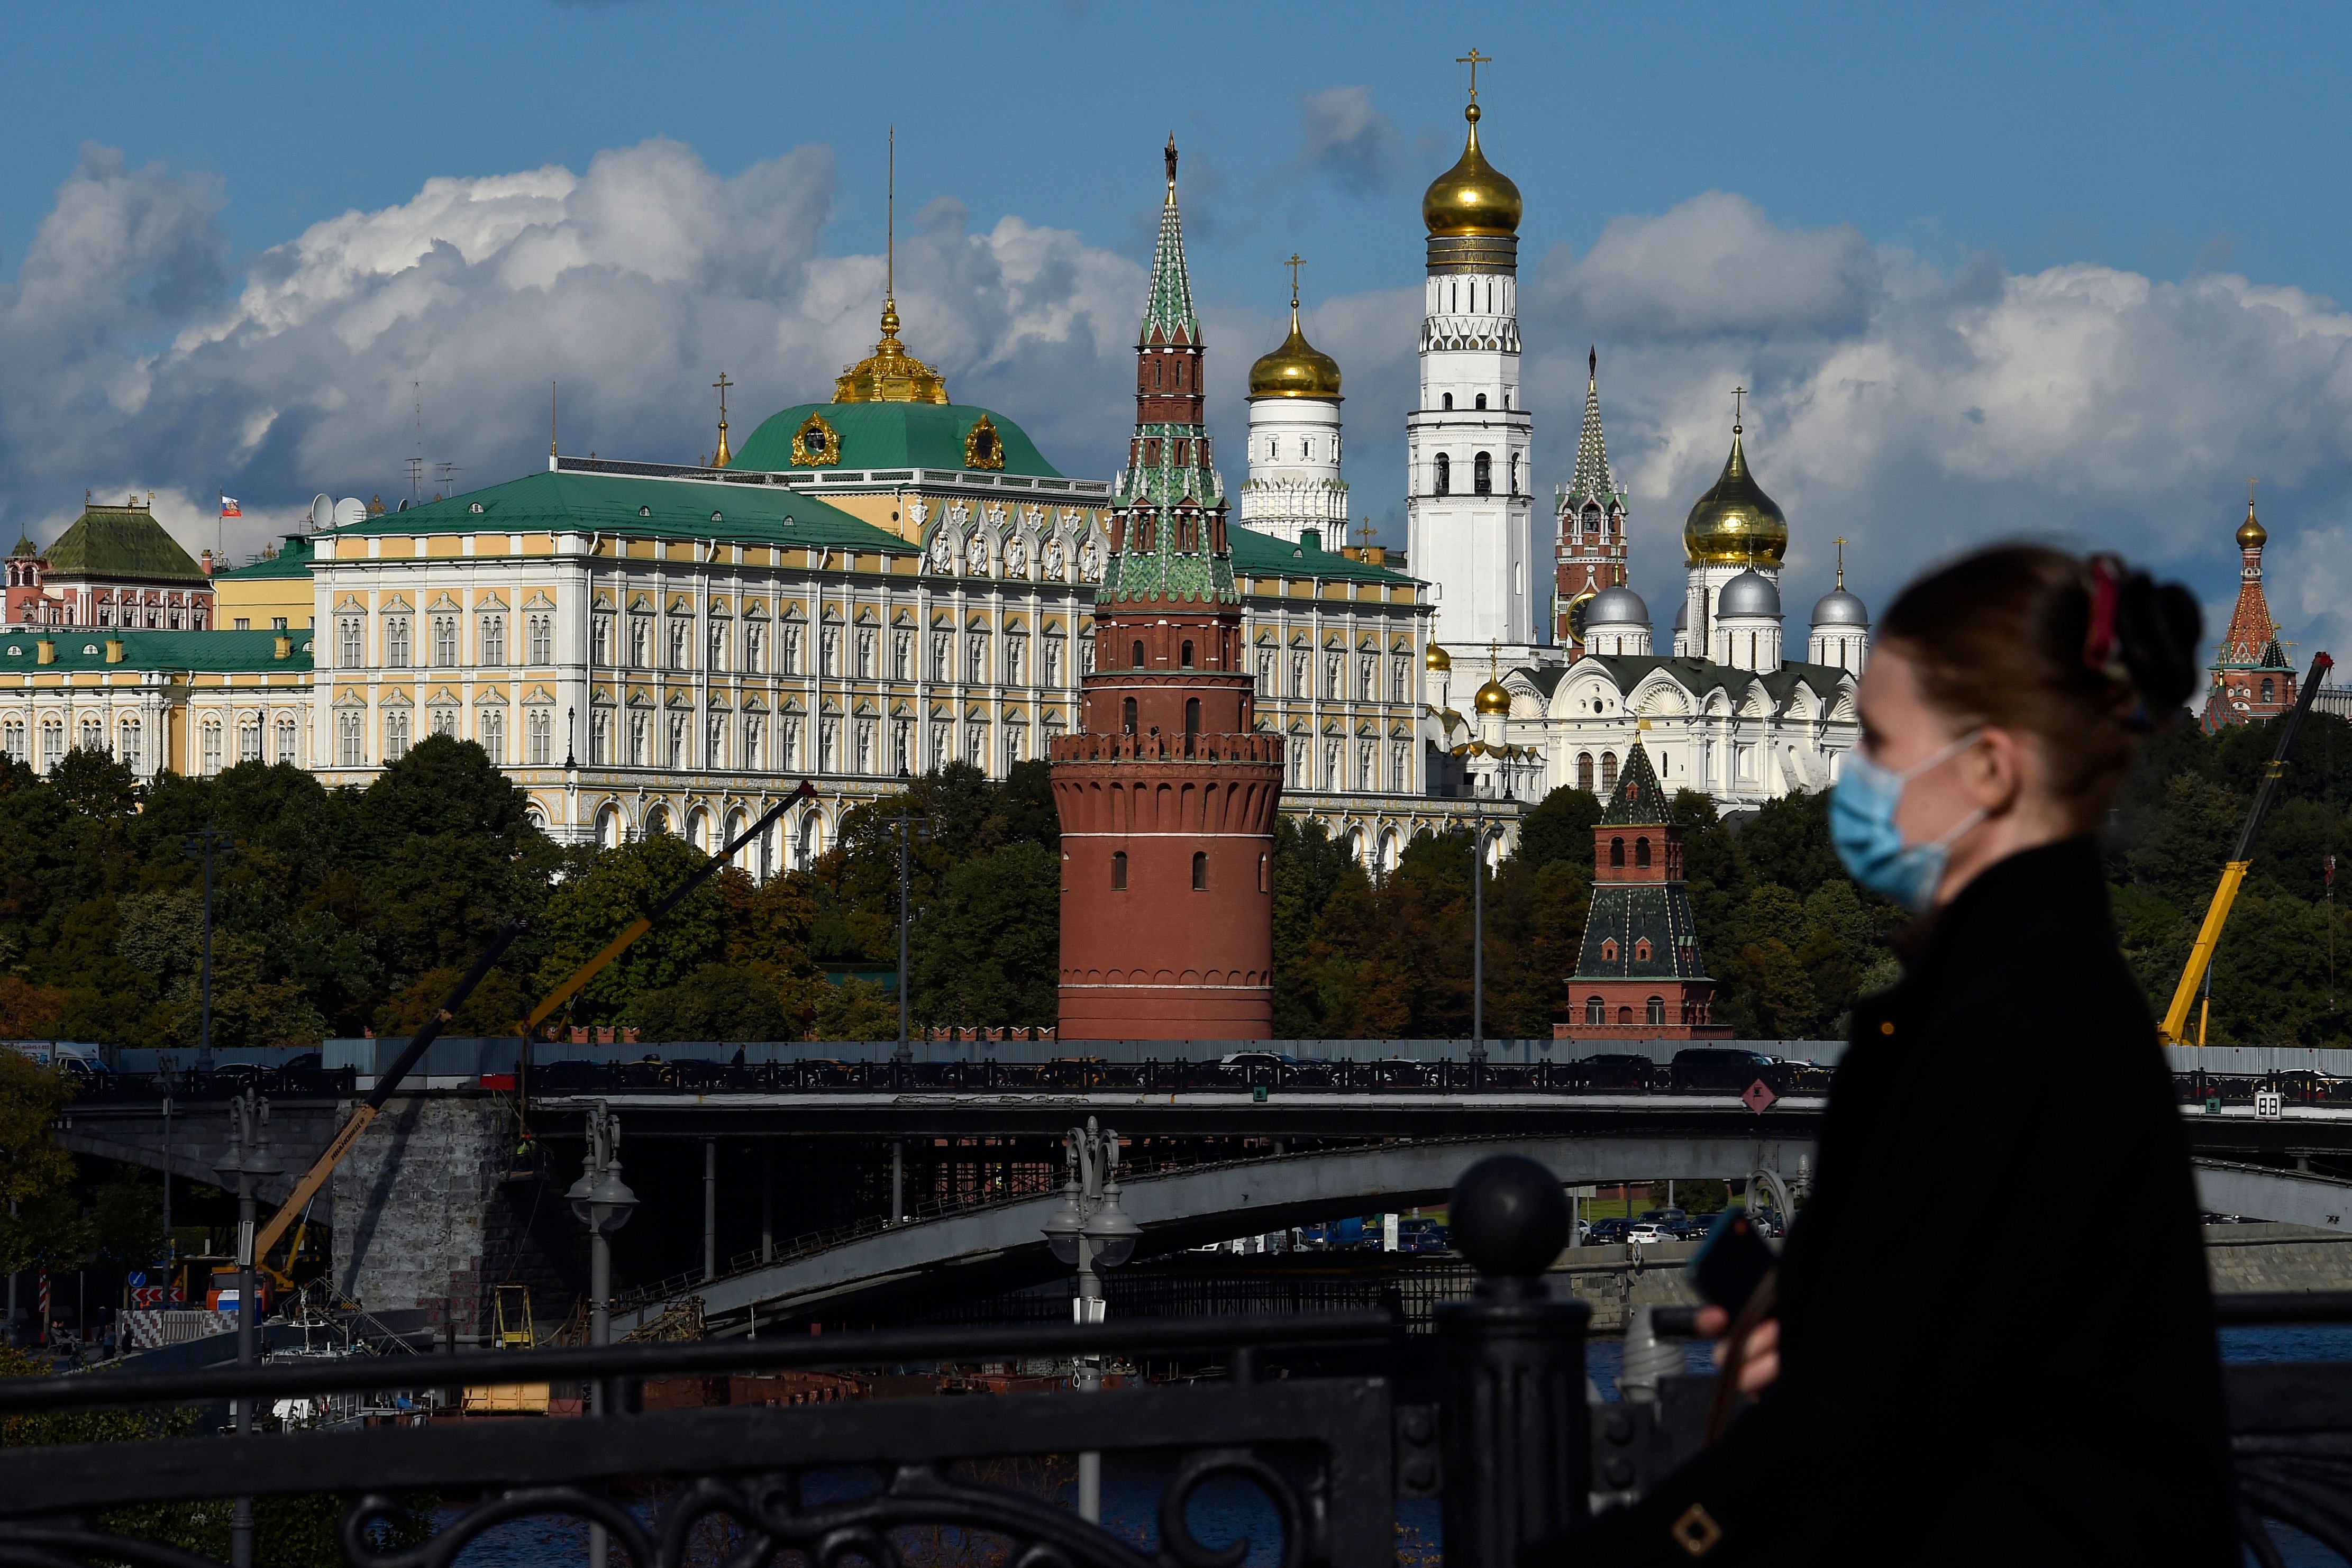 A woman wearing a face mask to protect against the coronavirus disease walks in downtown Moscow, with the Kremlin seen in the background, on Sept. 15, 2020. (Natalia Kolesnikova—AFP/Getty Images)